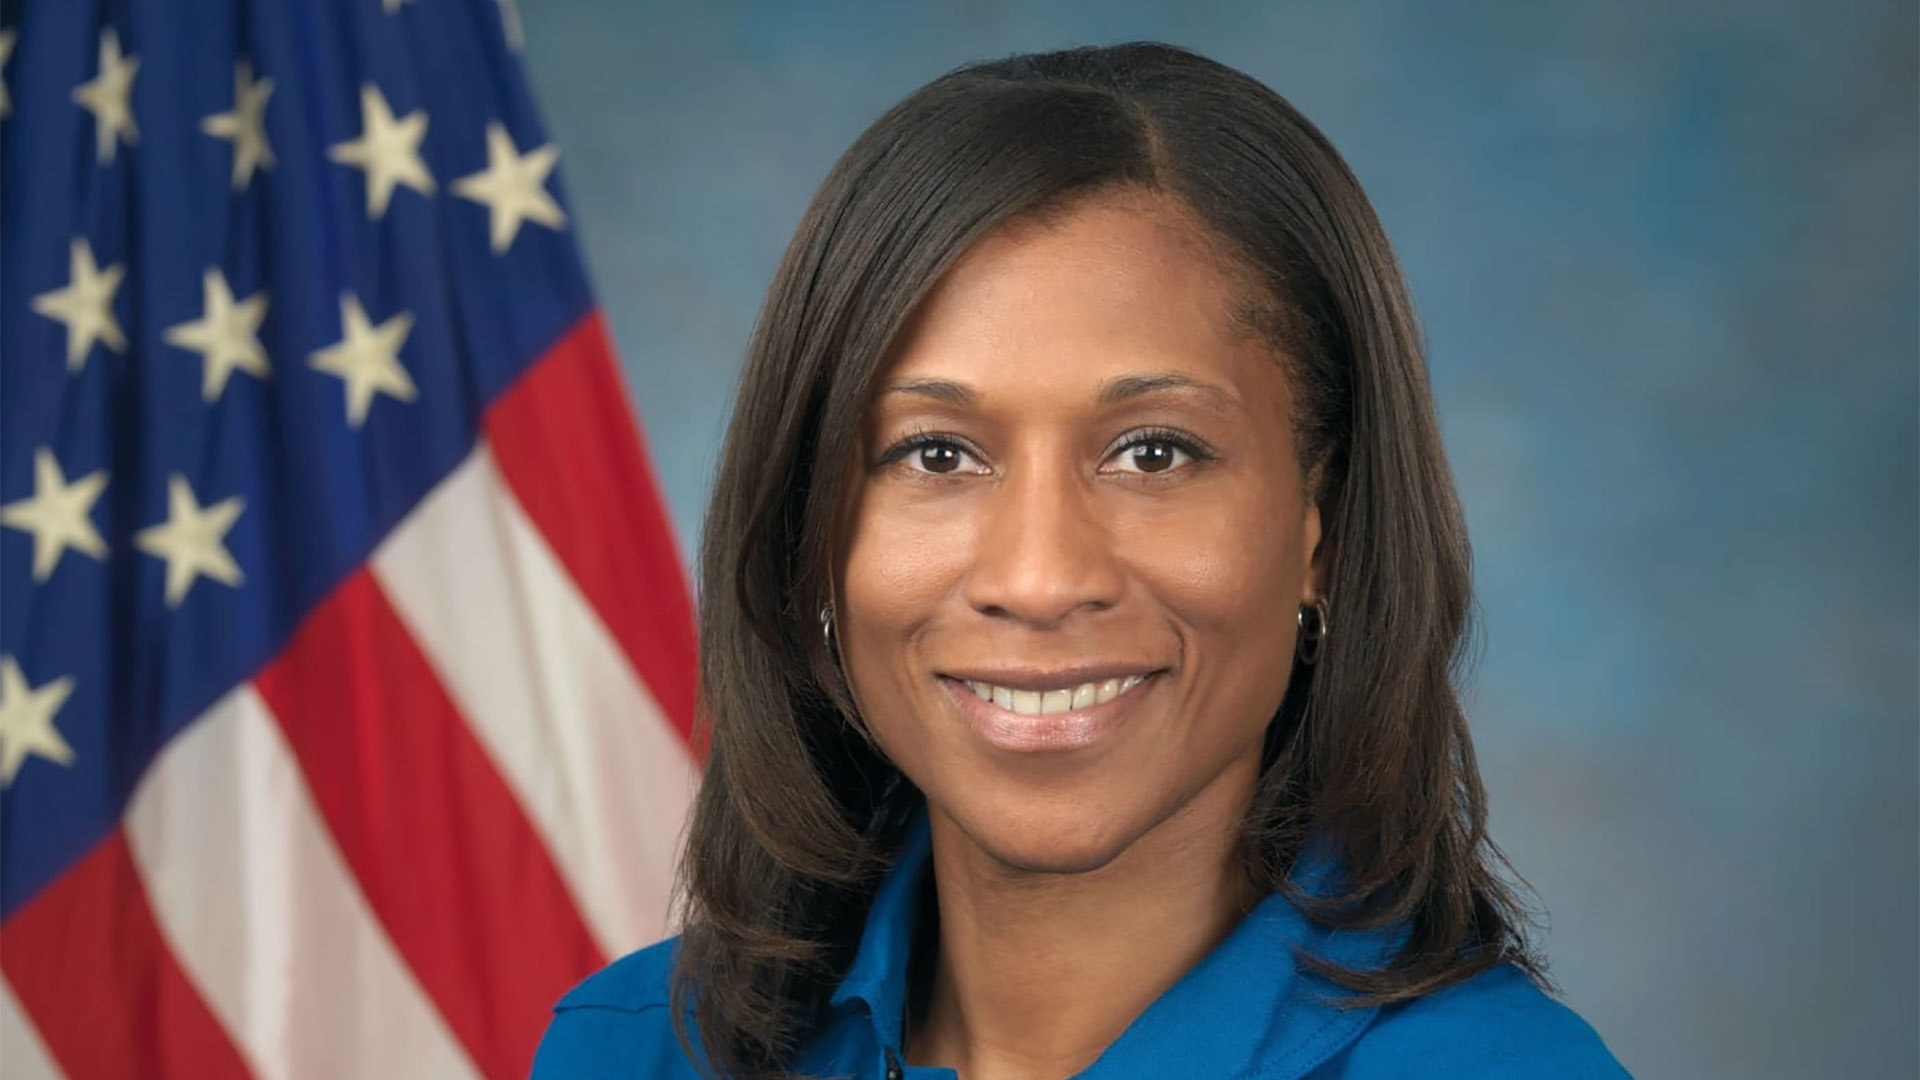 UMD Alum and NASA Astronaut Jeanette Epps to Become First Black Woman to Join an International Space Station Crew